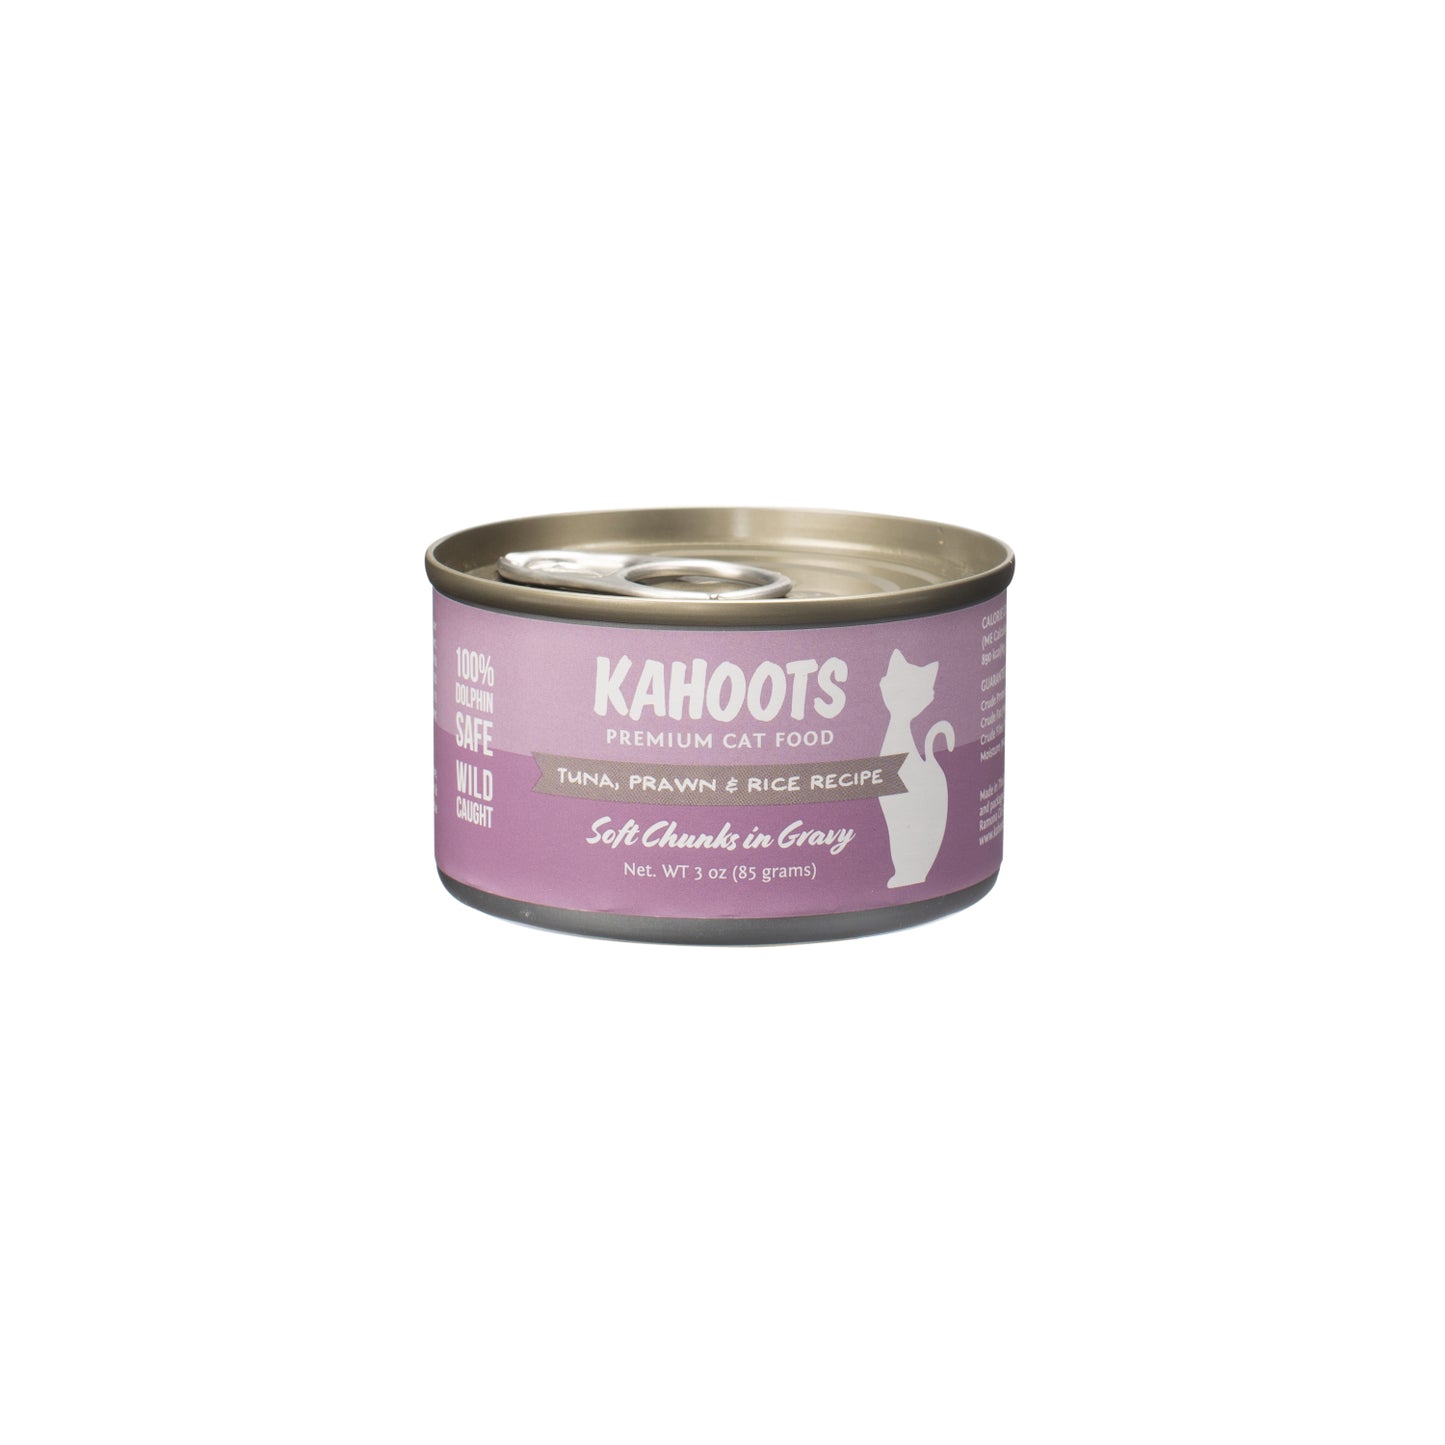 Tuna, prawn, and rice wet cat food. Picture of a white cat over a purple background on label